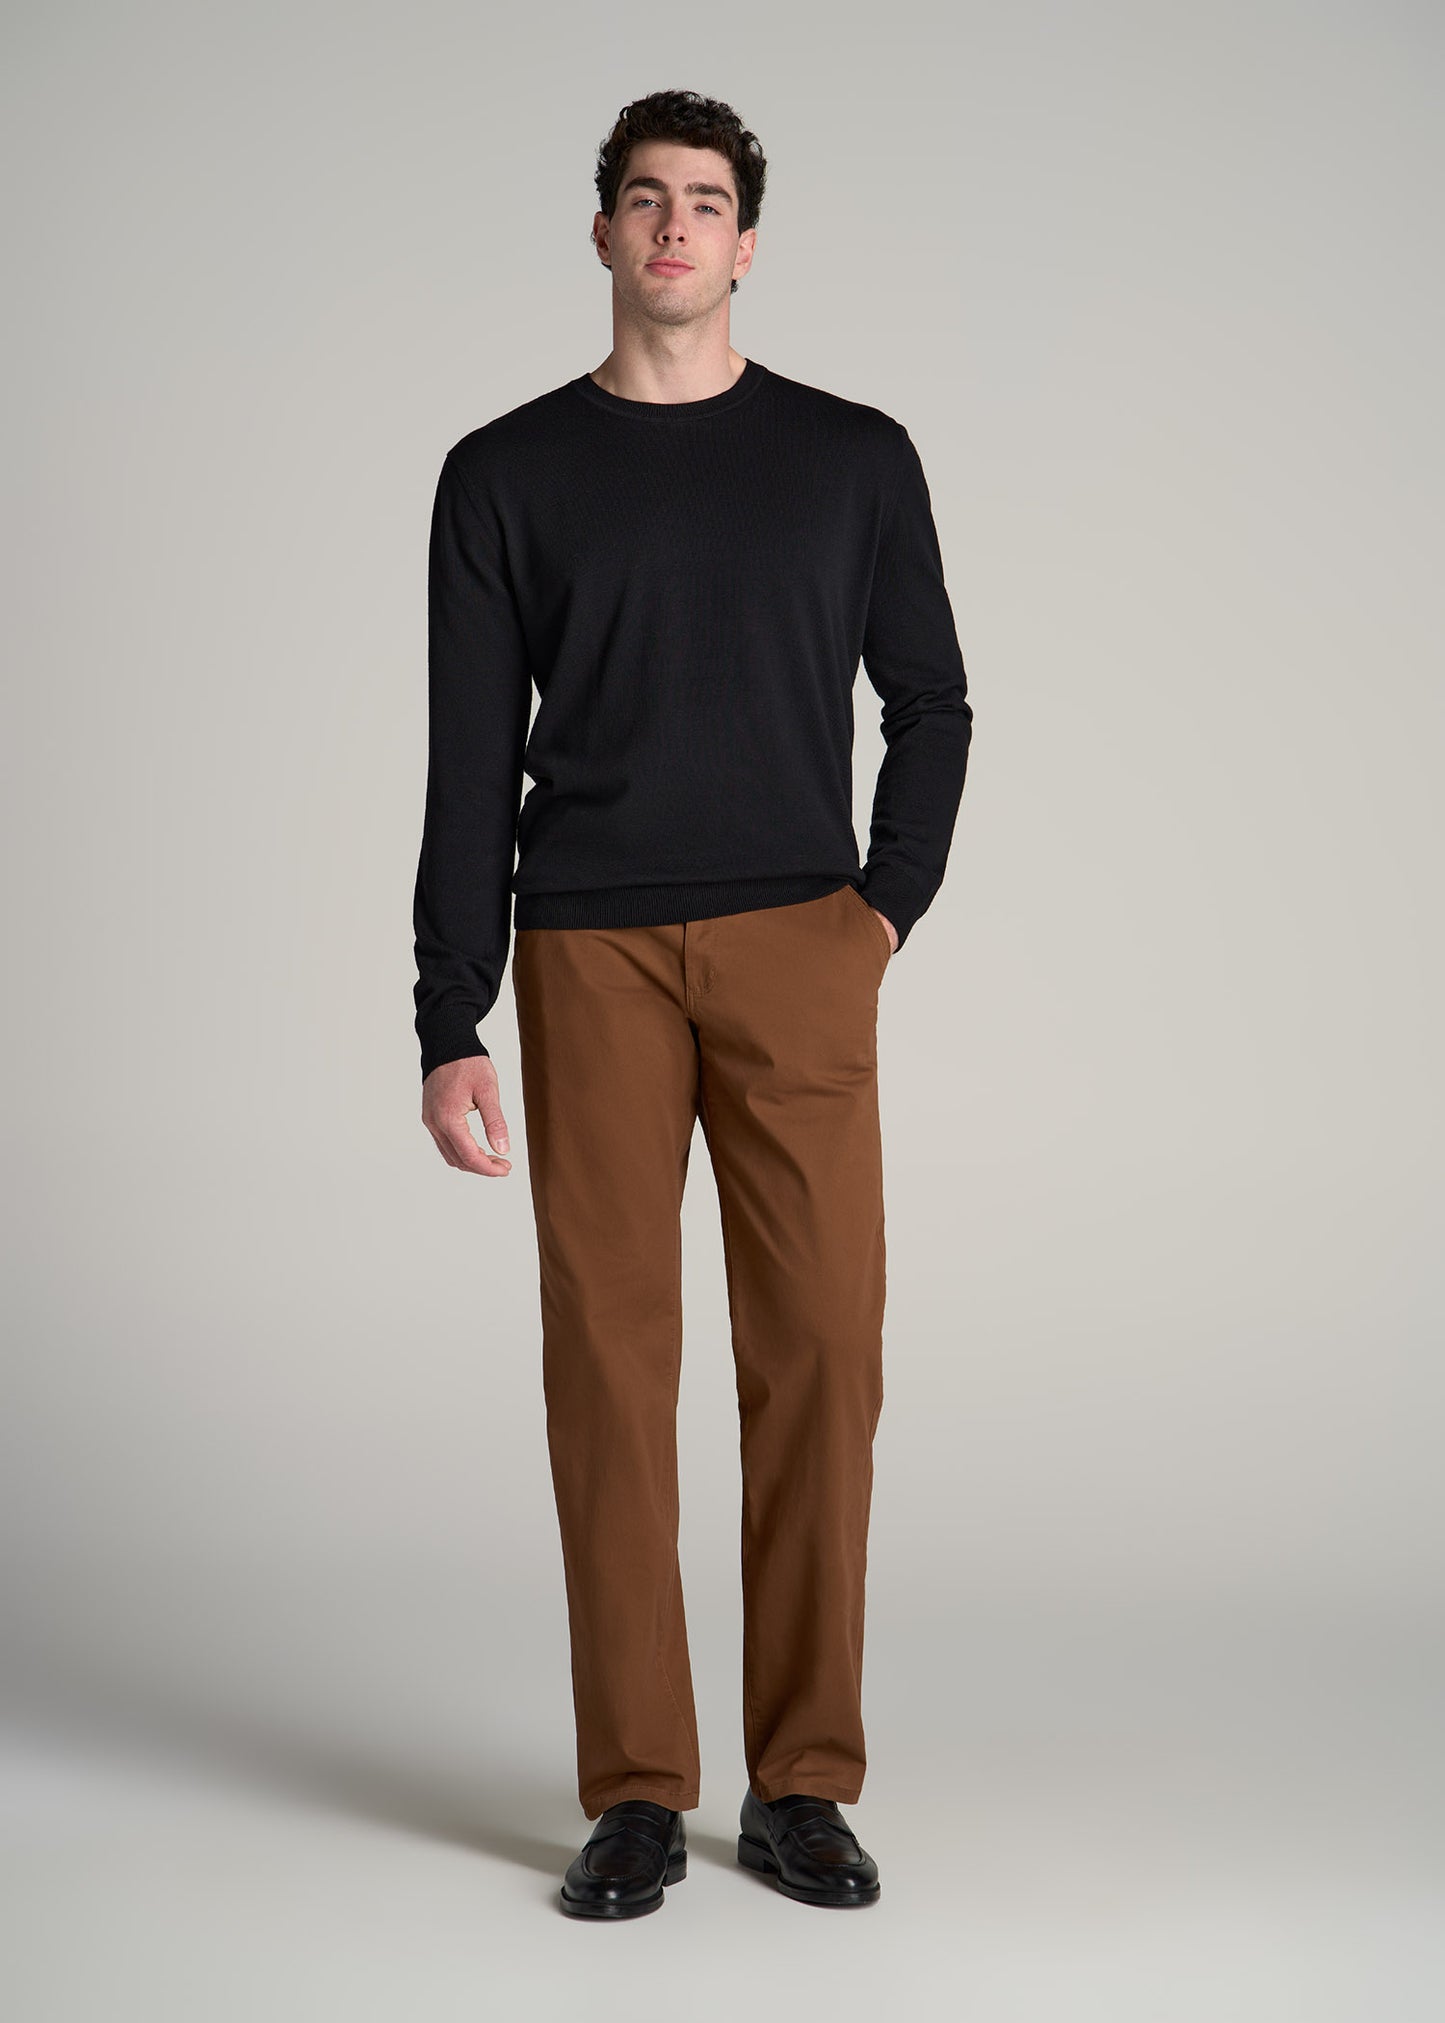 Mason SEMI-RELAXED Chinos in Nutshell - Pants for Tall Men